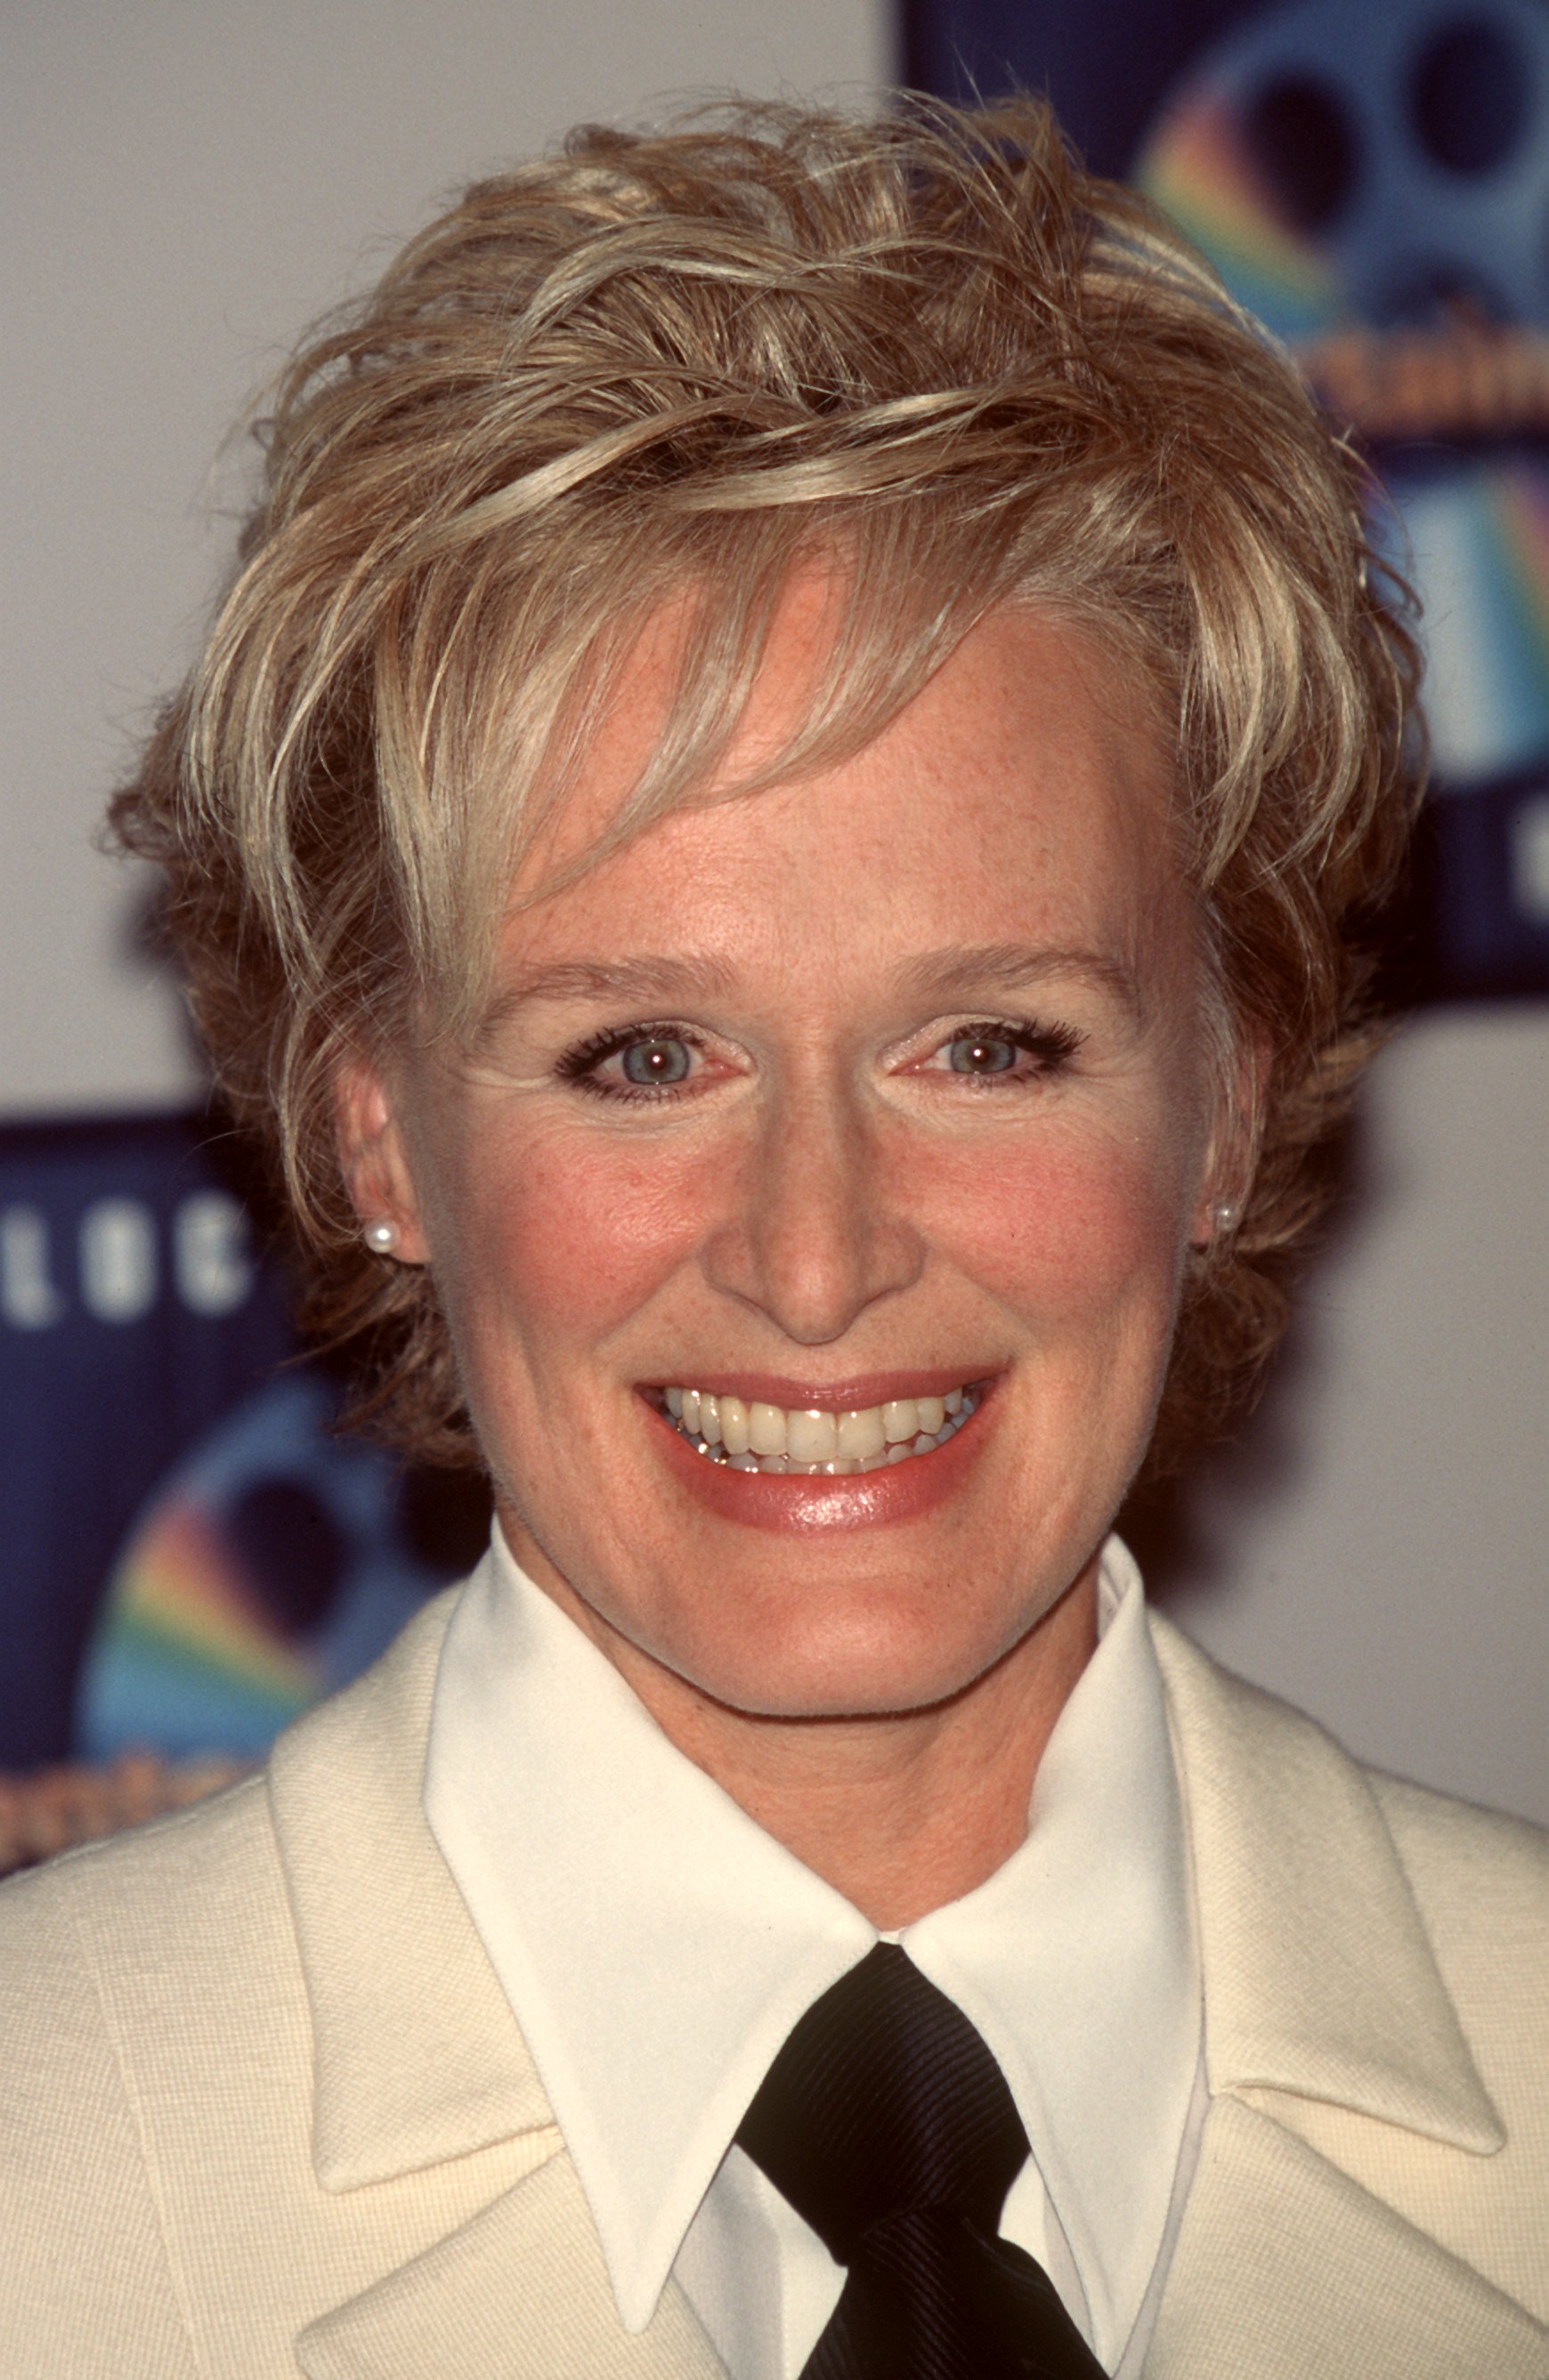 Glenn Close Image HD Wallpaper And Background Photos